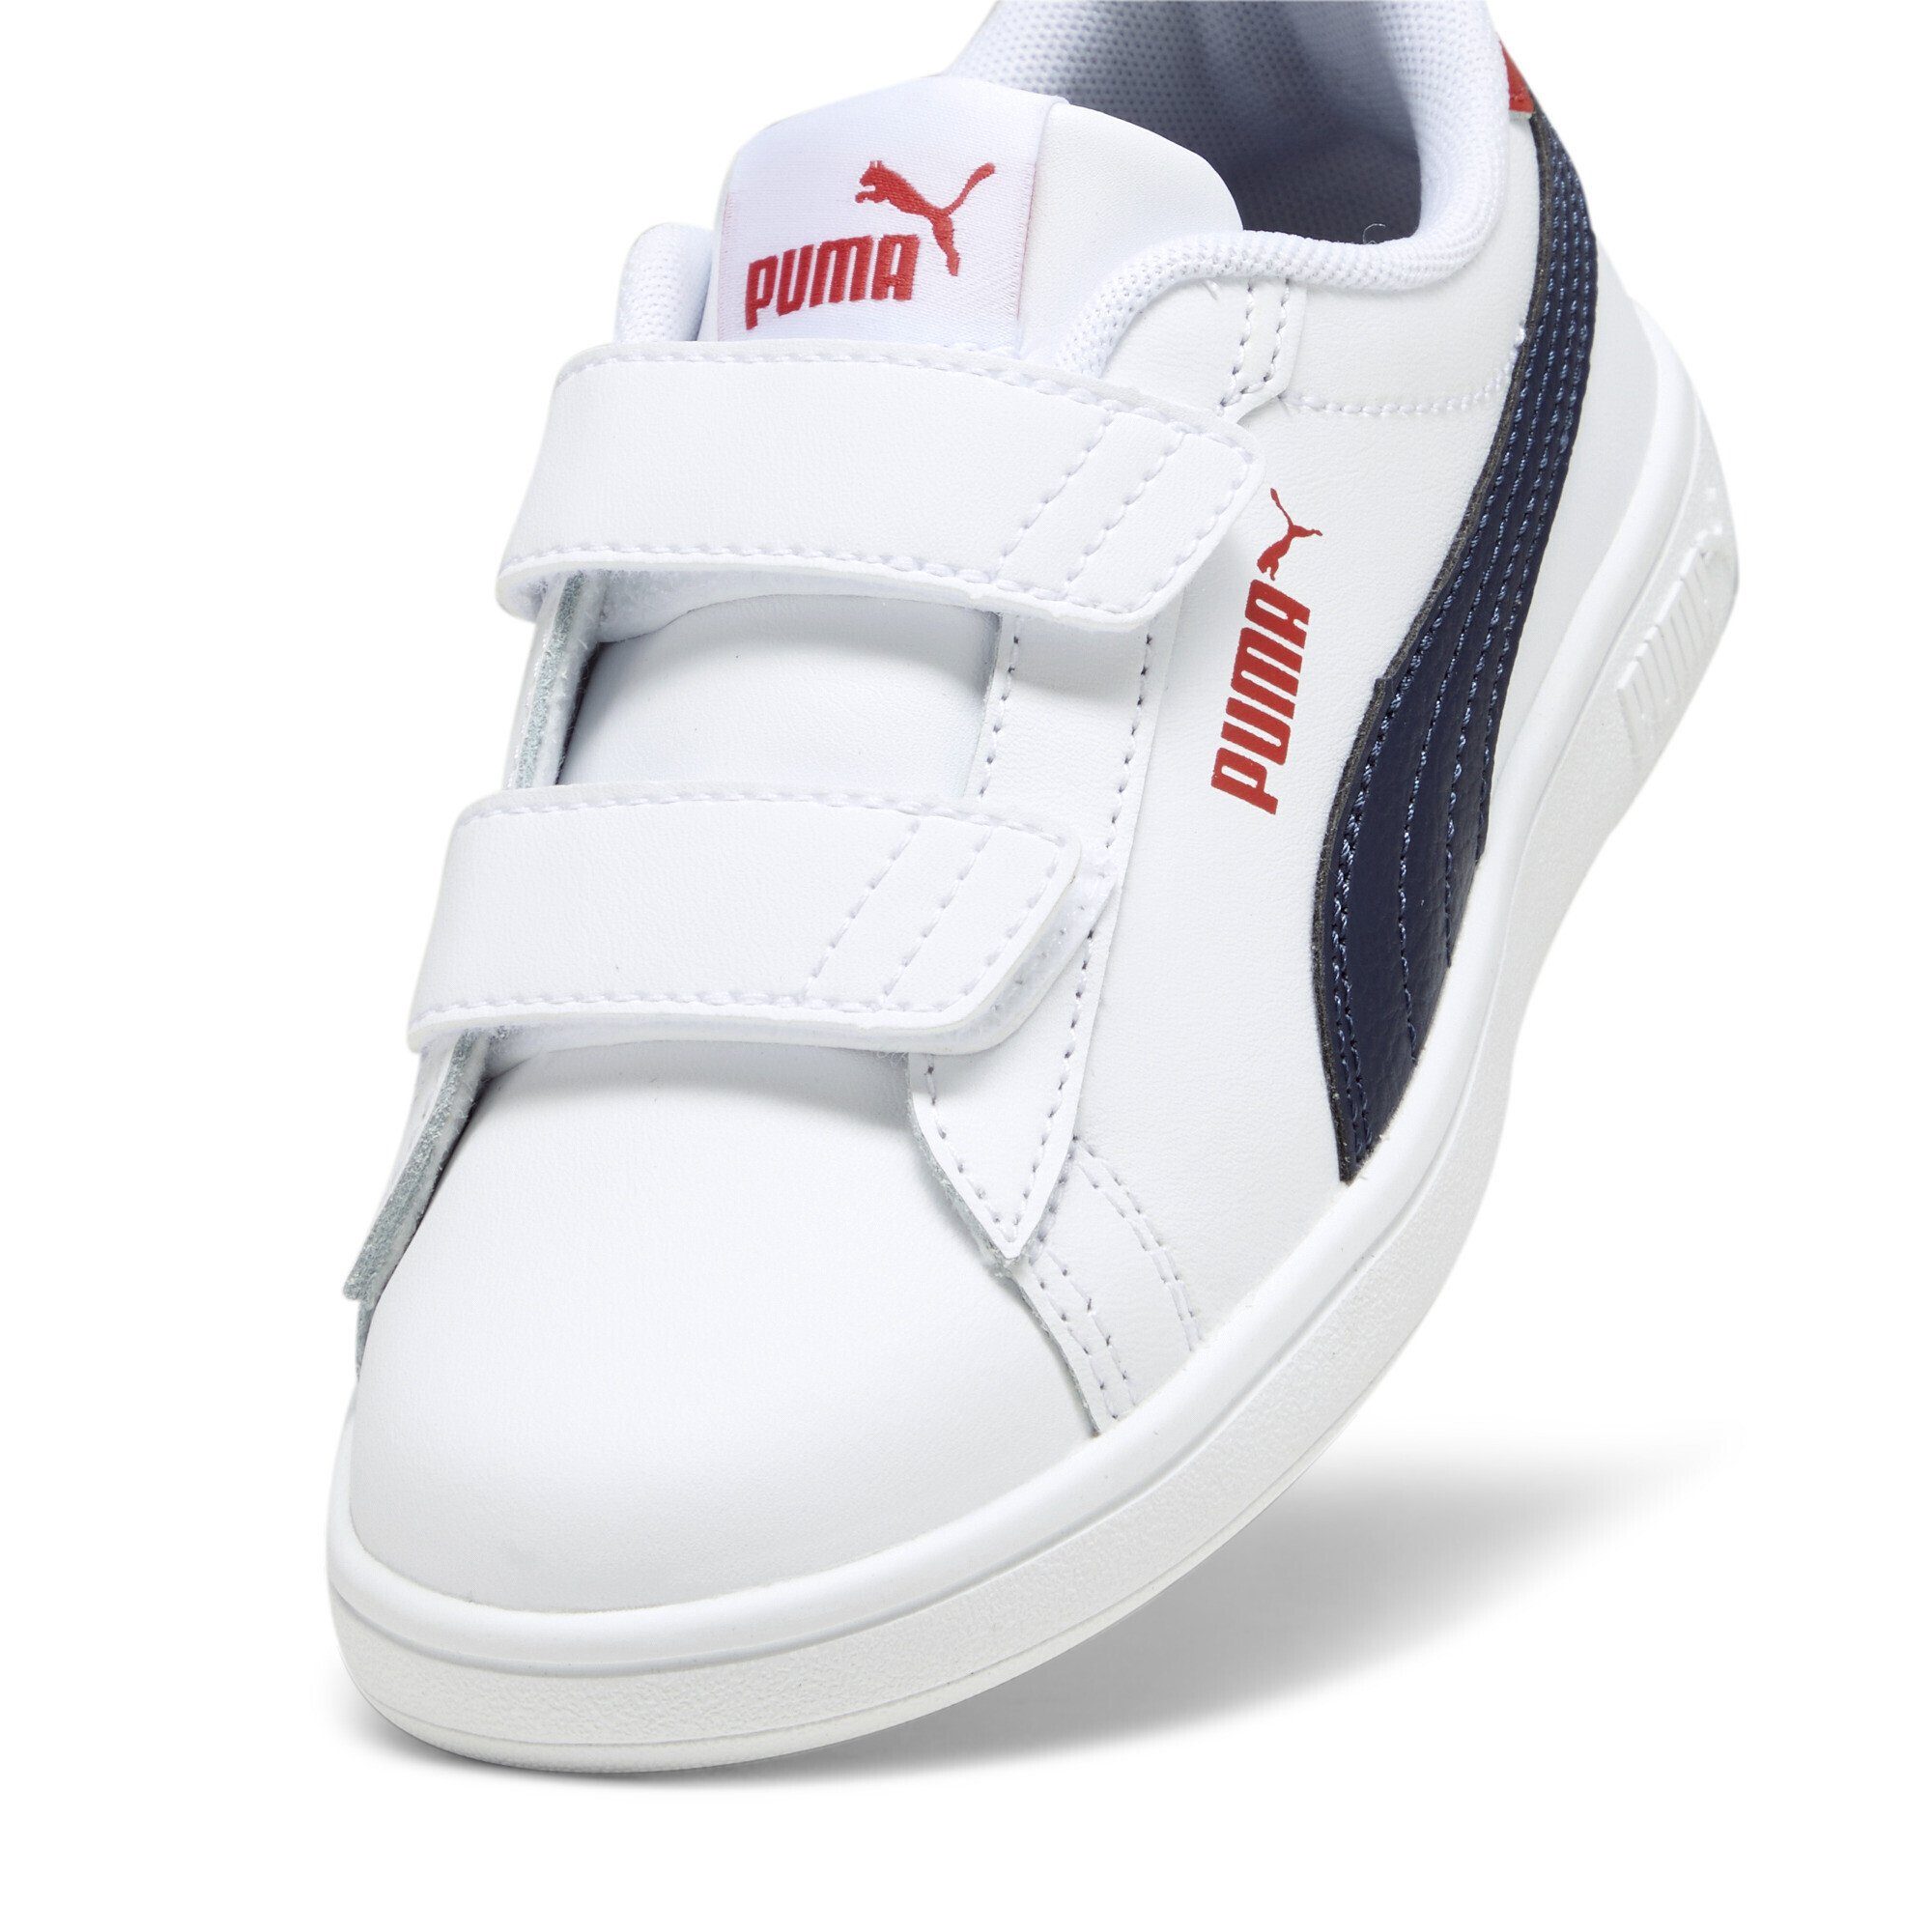 PUMA Smash 3.0 Leather Sneaker White Blue Navy Sneakers Time For Red All